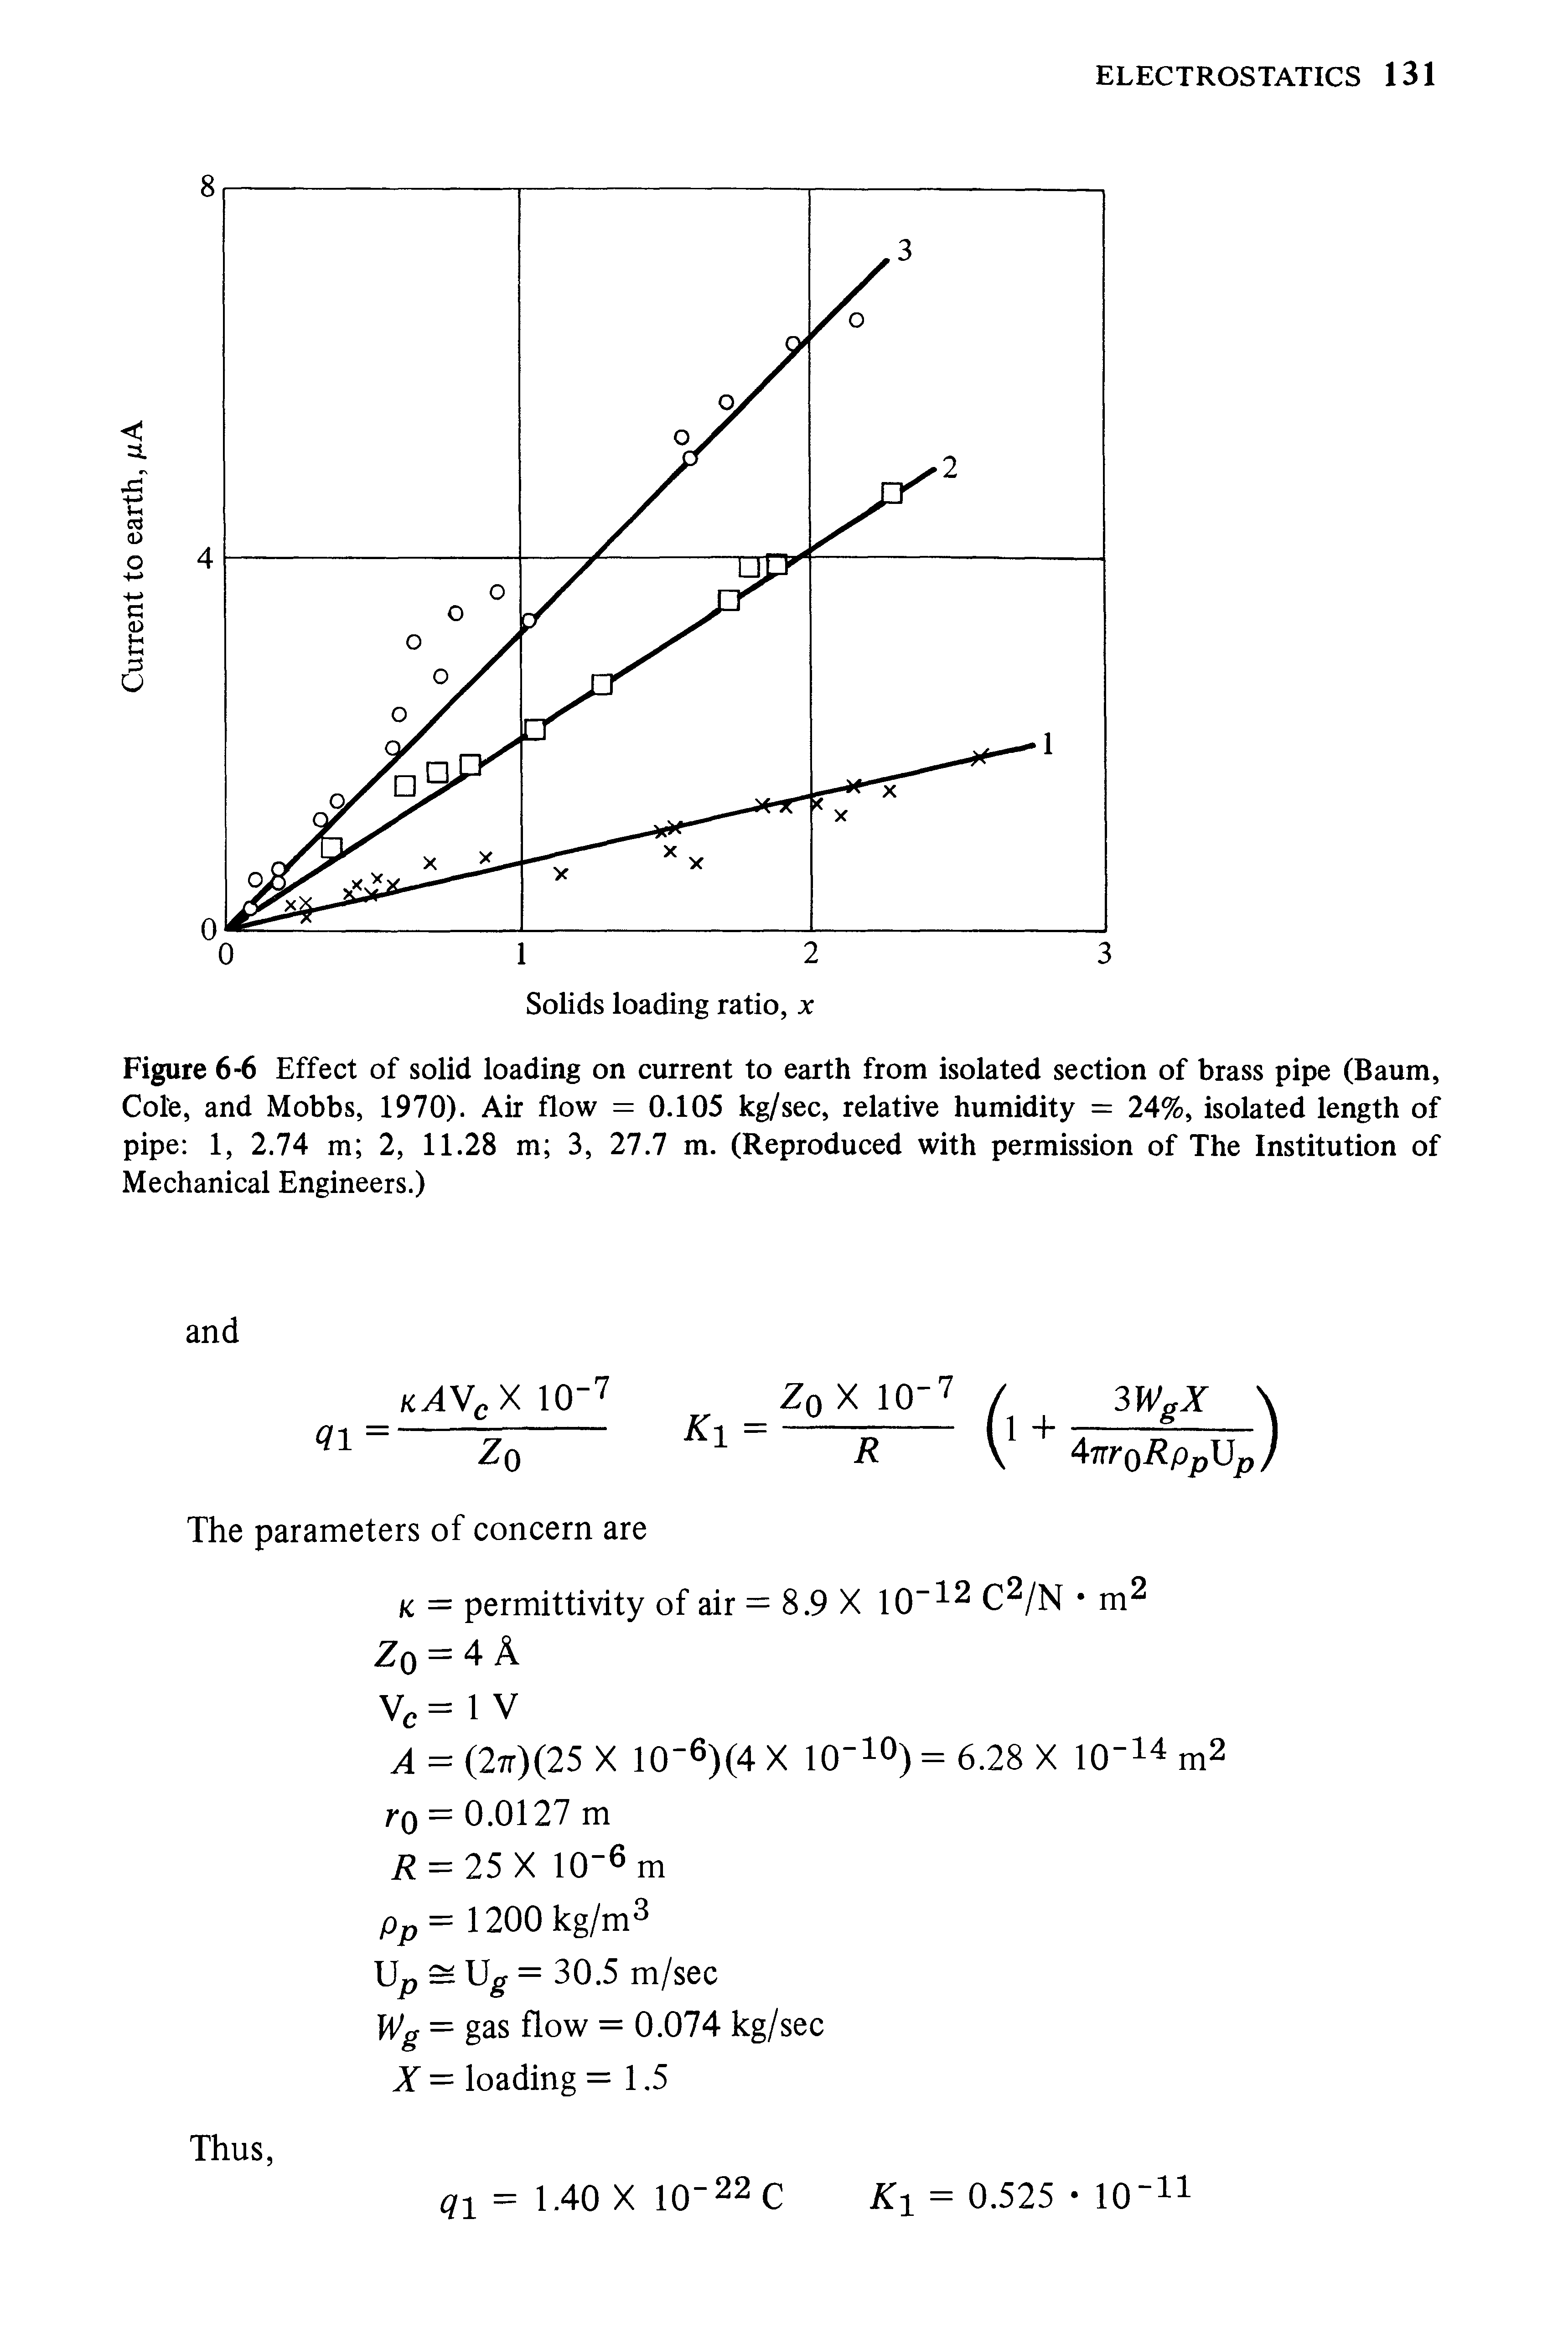 Figure 6-6 Effect of solid loading on current to earth from isolated section of brass pipe (Baum, Cole, and Mobbs, 1970). Air flow = 0.105 kg/sec, relative humidity = 24%, isolated length of pipe 1, 2.74 m 2, 11.28 m 3, 27.7 m. (Reproduced with permission of The Institution of Mechanical Engineers.)...